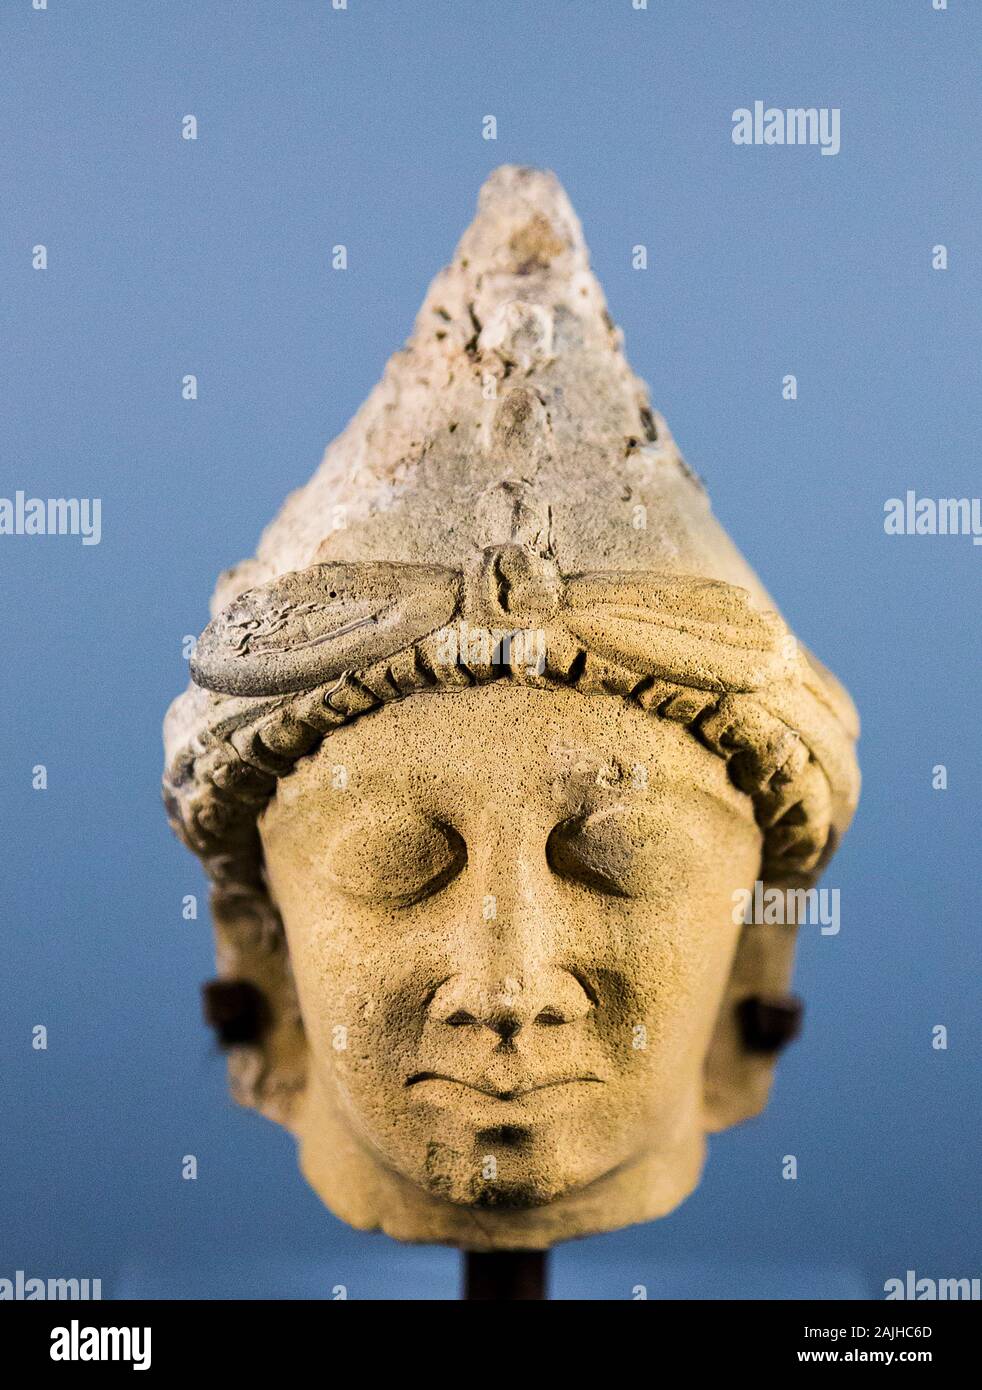 Photo taken during the opening visit of the exhibition “Osiris, Egypt's Sunken Mysteries”.  Small head of a foreign god. Stock Photo